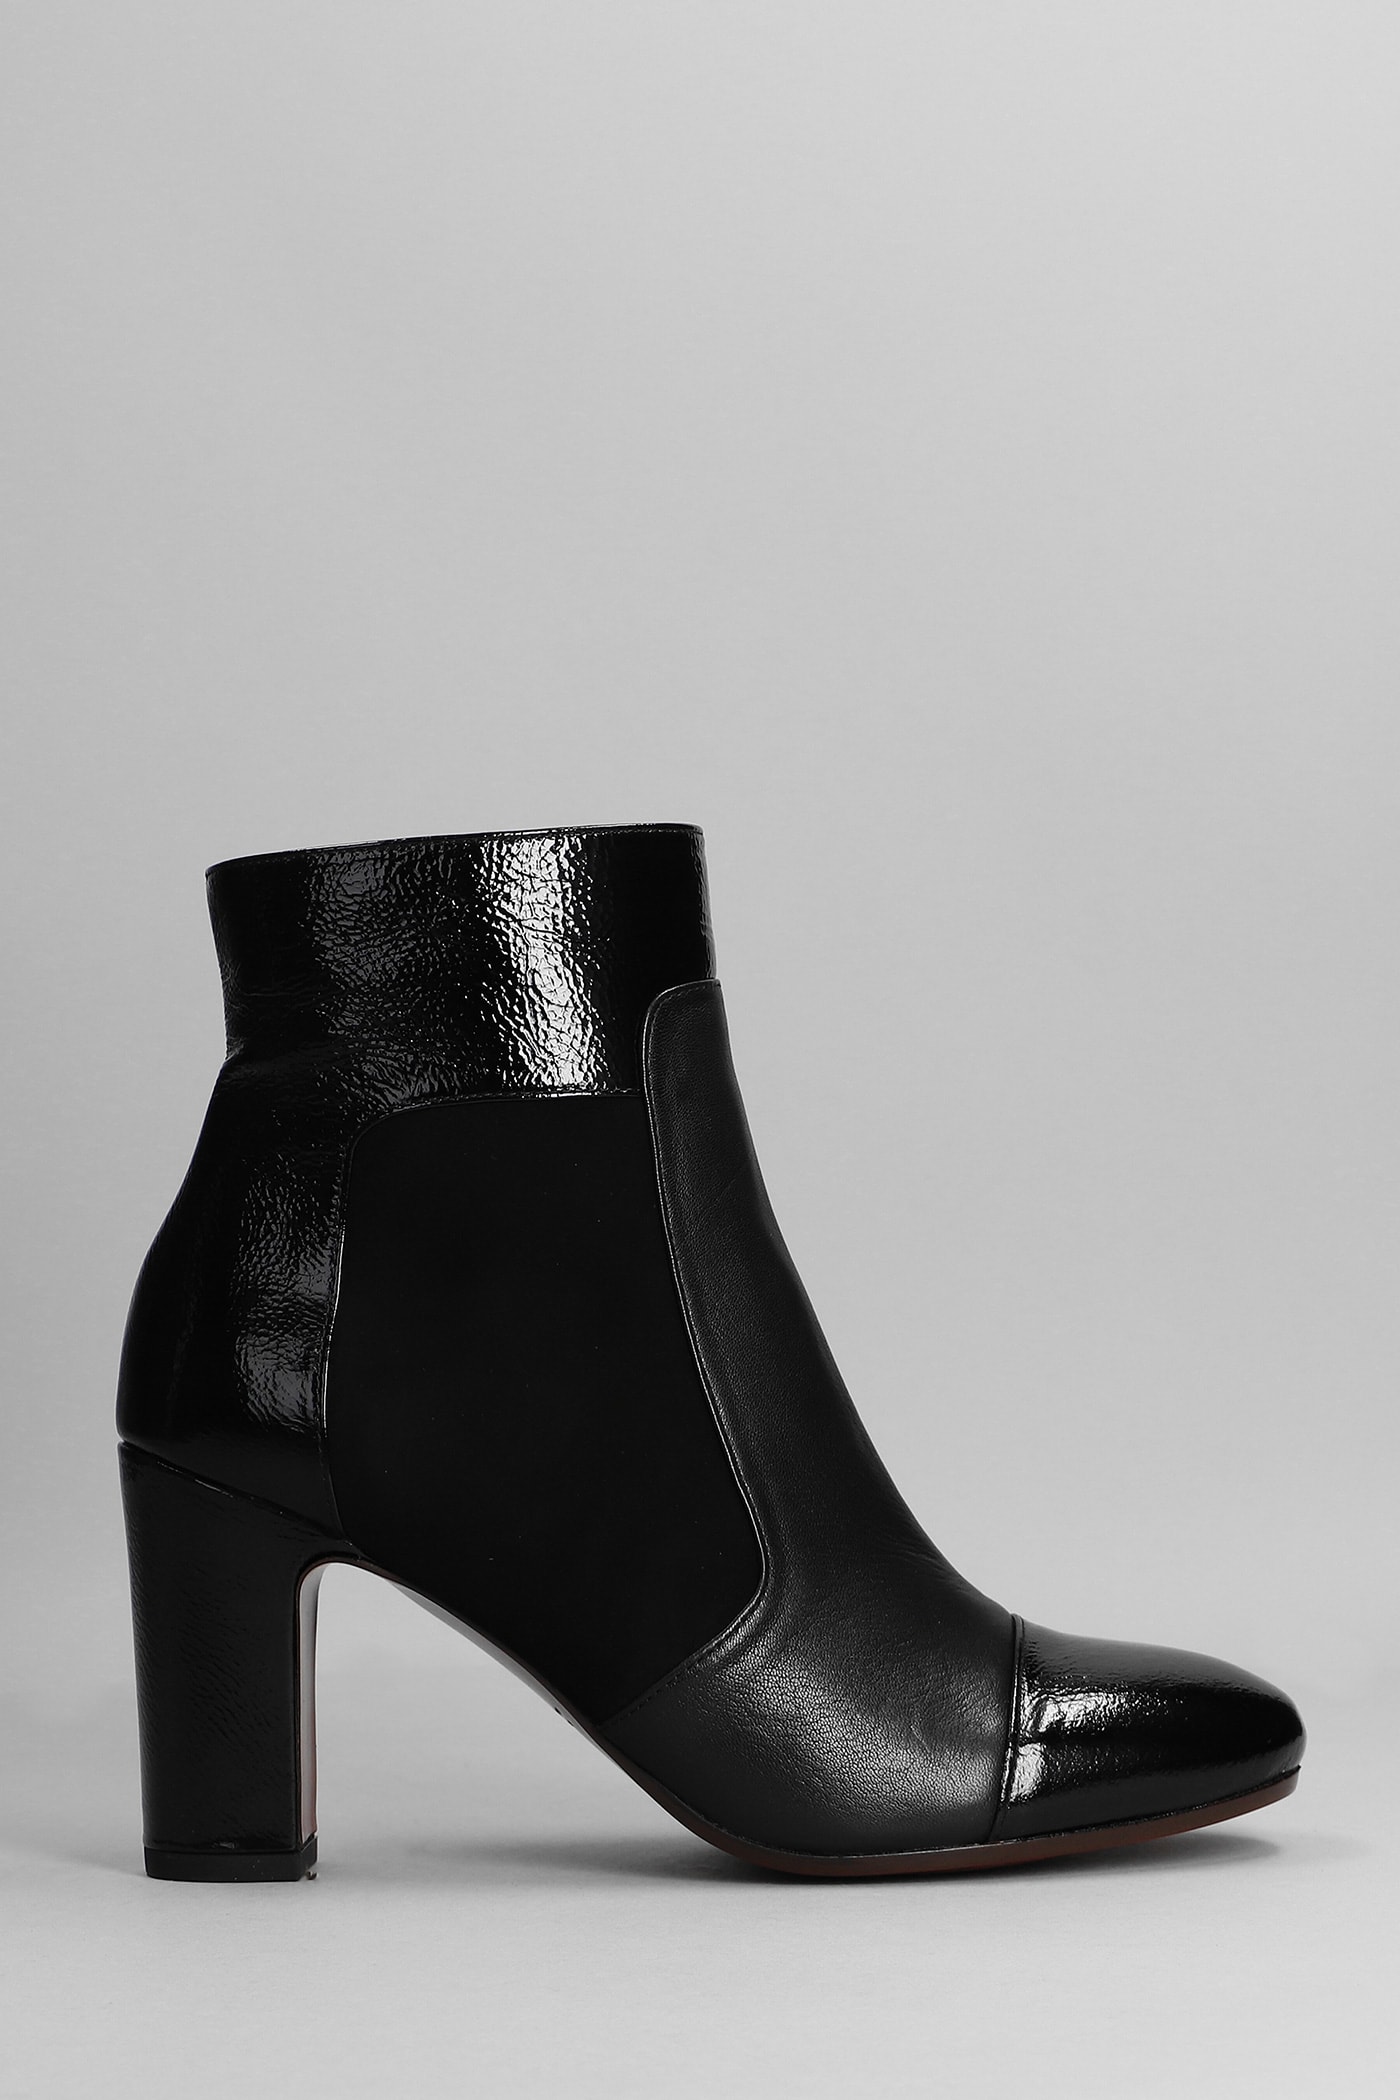 Chie Mihara Wetop High Heels Ankle Boots In Black Leather